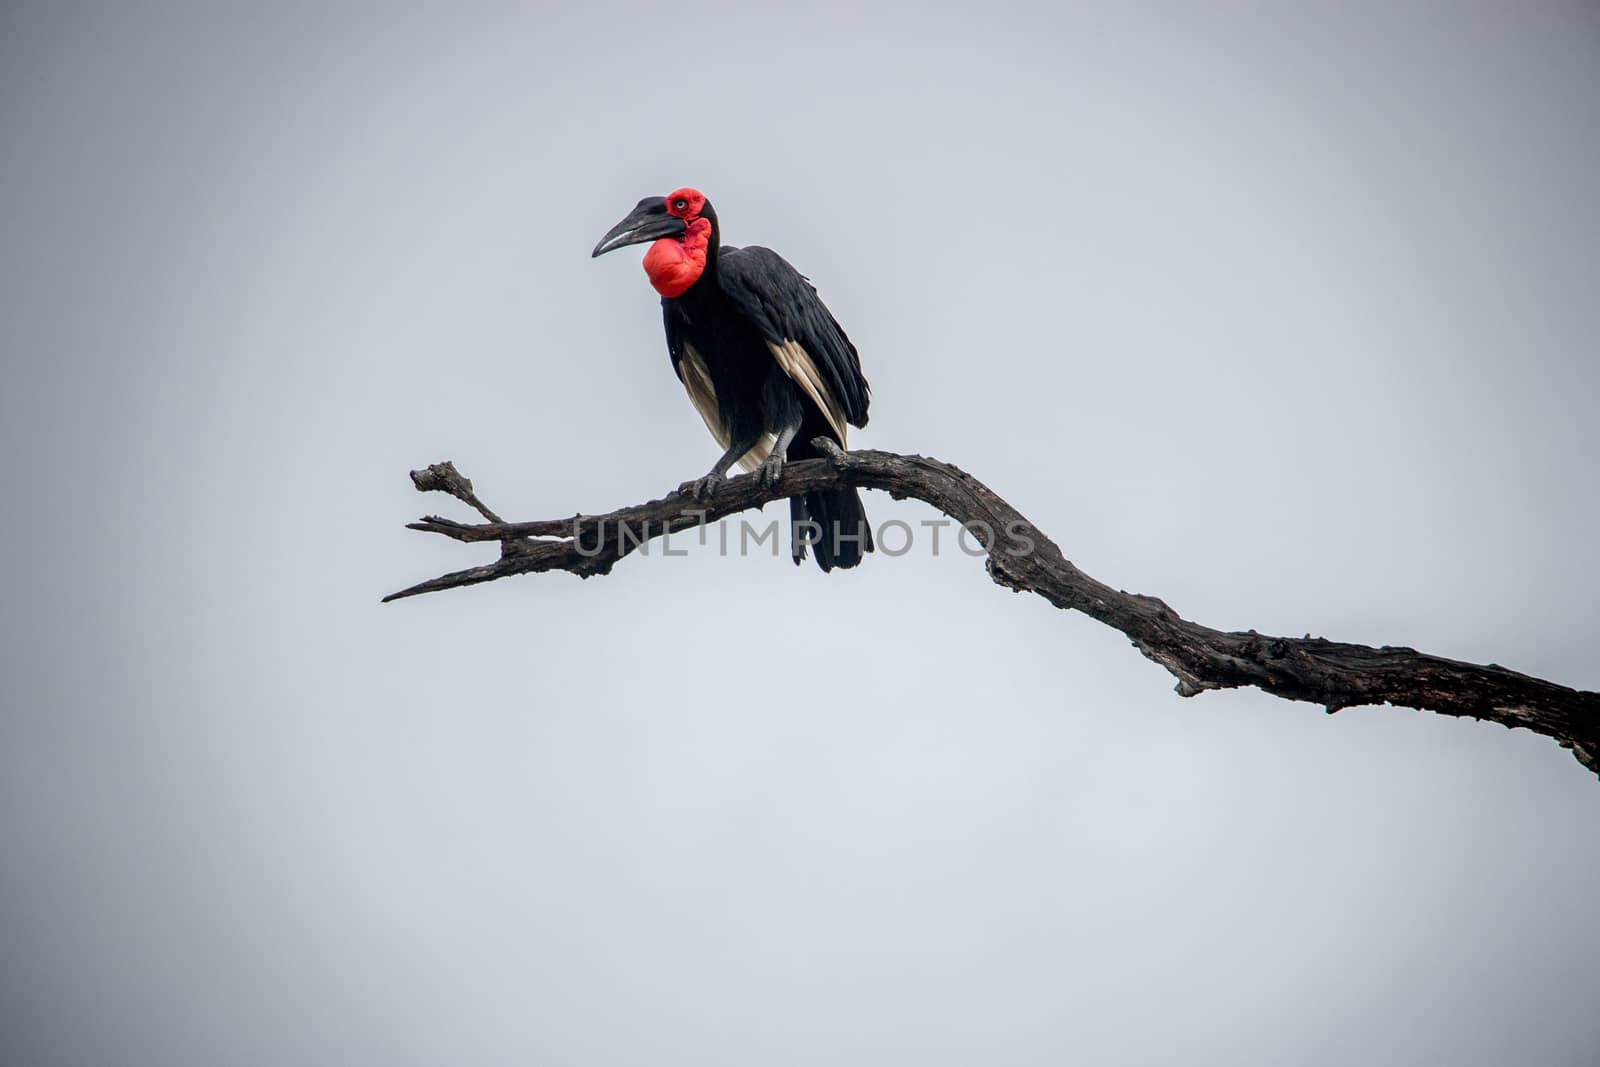 Southern ground hornbill in the Kruger National Park, South Africa. by Simoneemanphotography